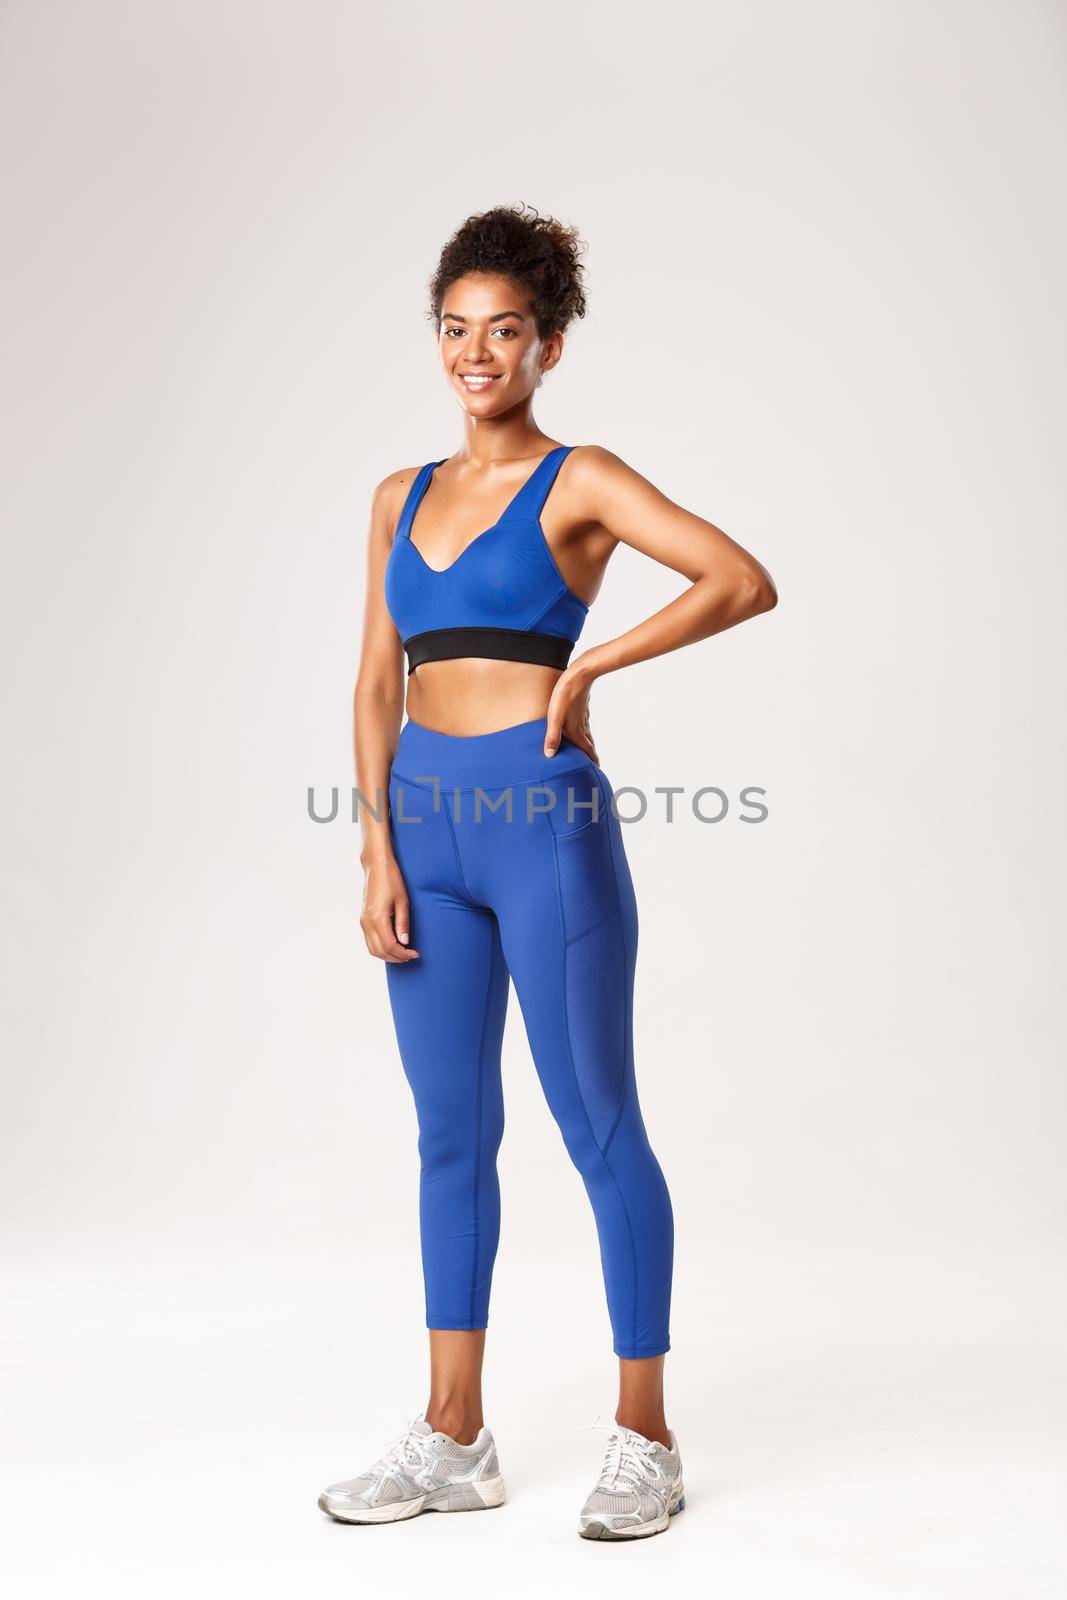 Full length of attractive african-american sportswoman with curly combed hair, wearing sports bra and leggings, smiling at camera, ready for workout, standing over white background.